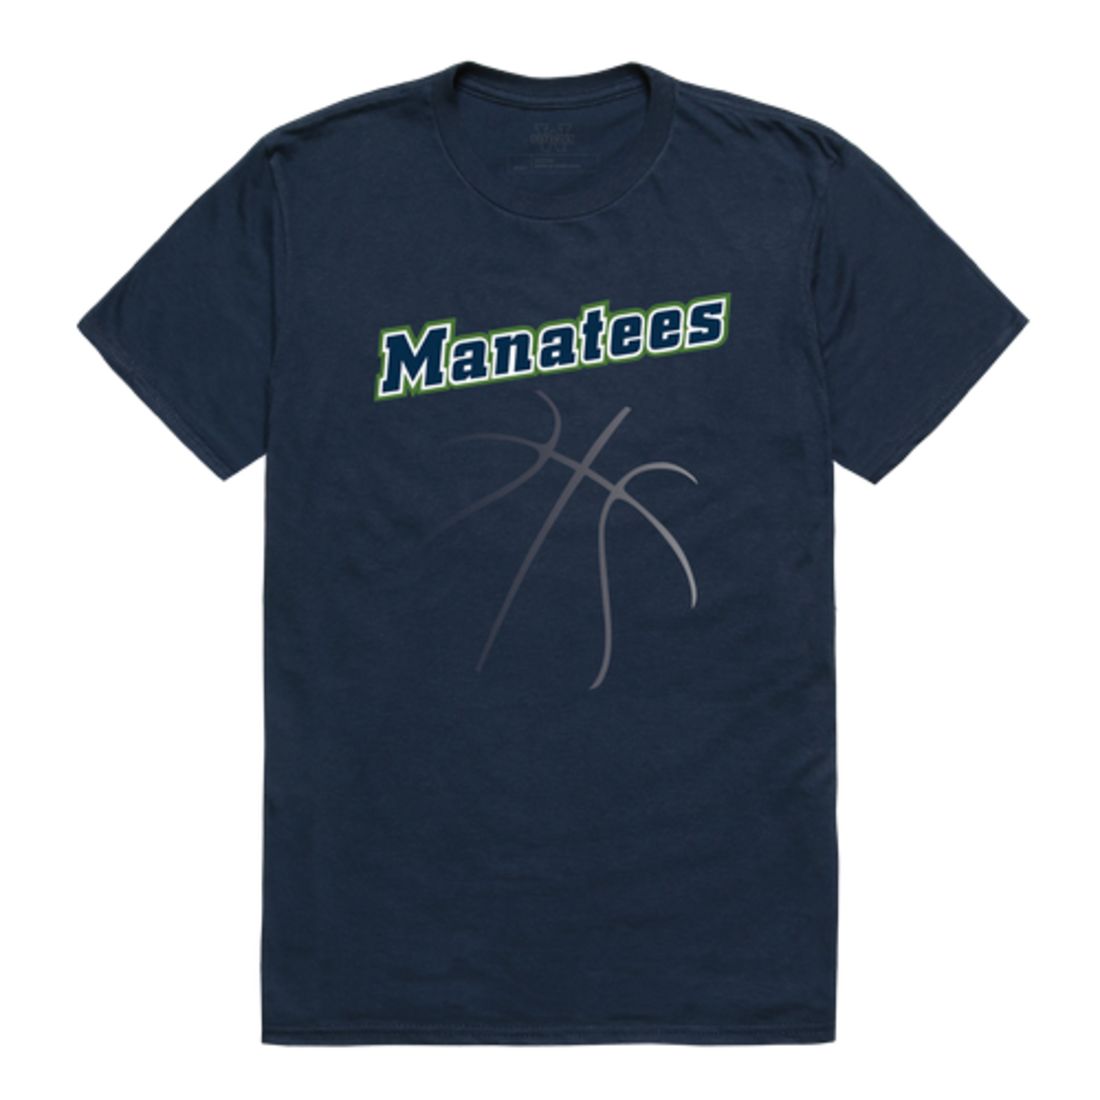 State College of Florida Manatees Basketball T-Shirt